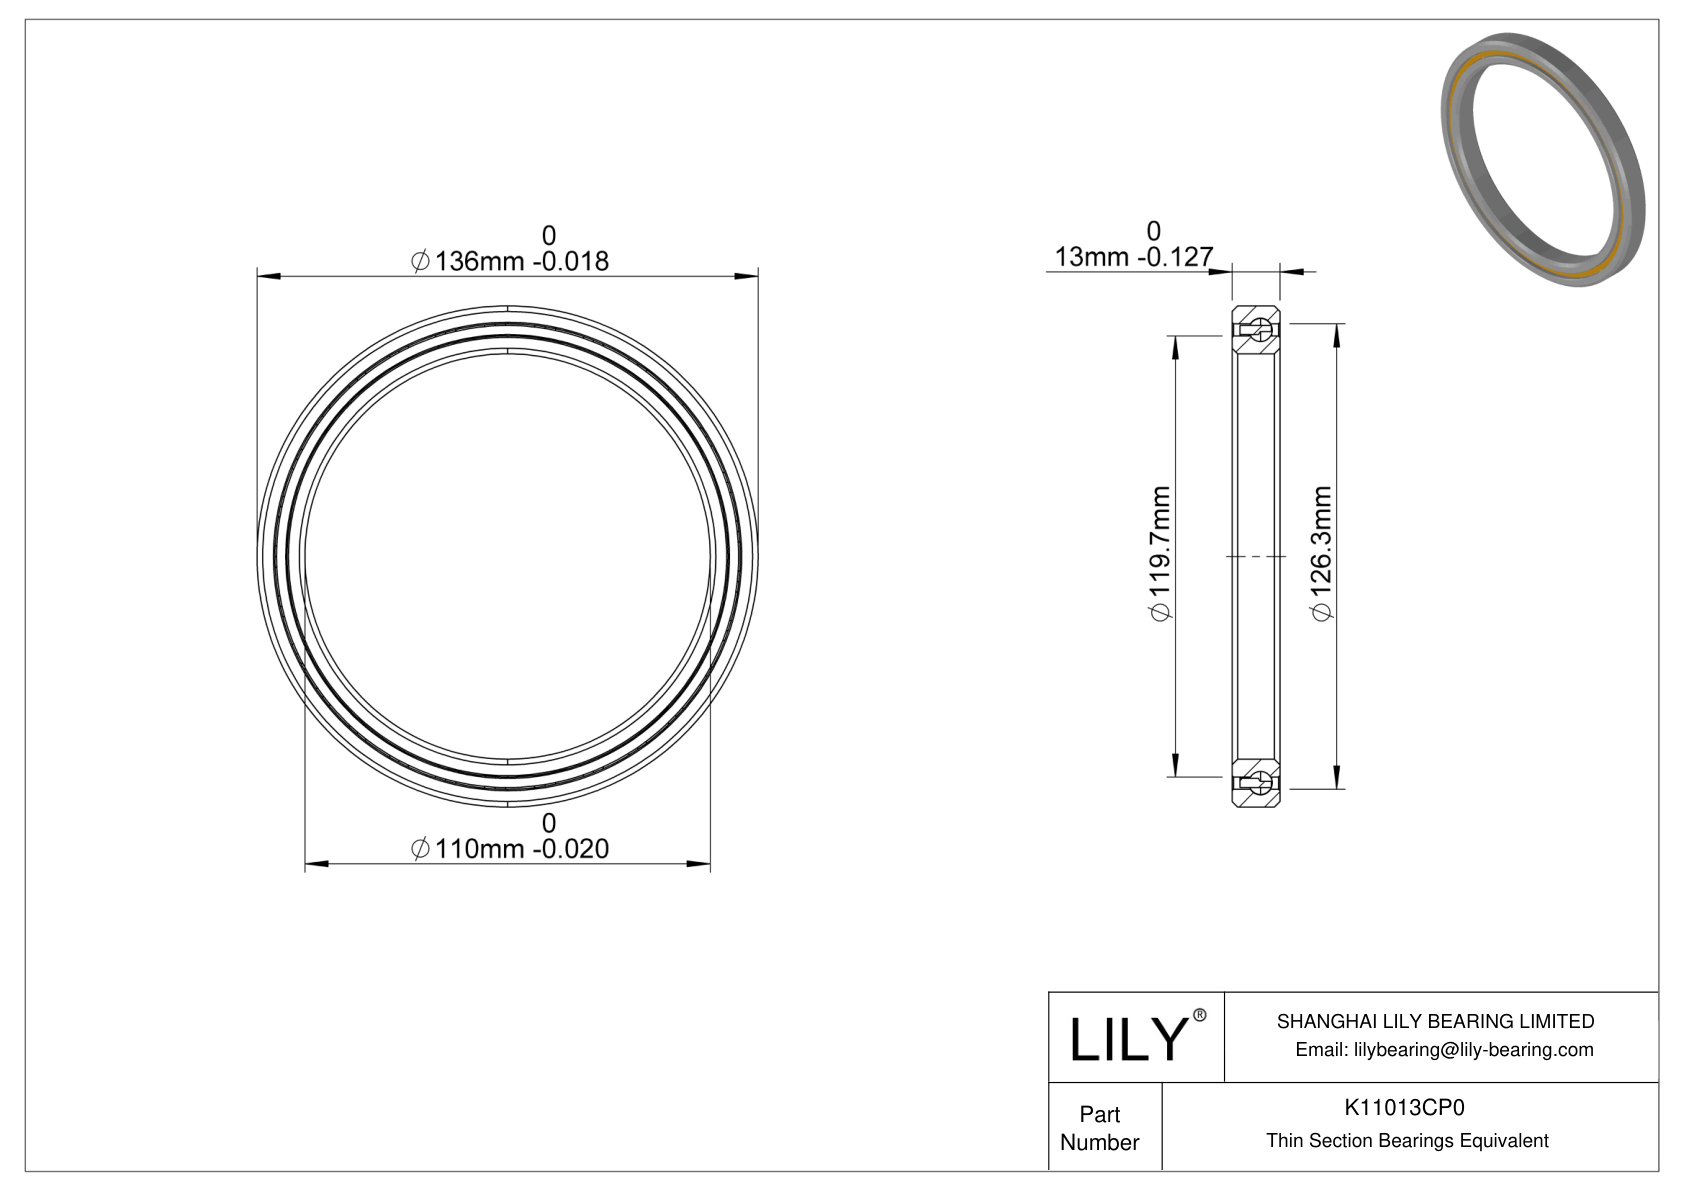 K11013CP0 Constant Section (CS) Bearings cad drawing